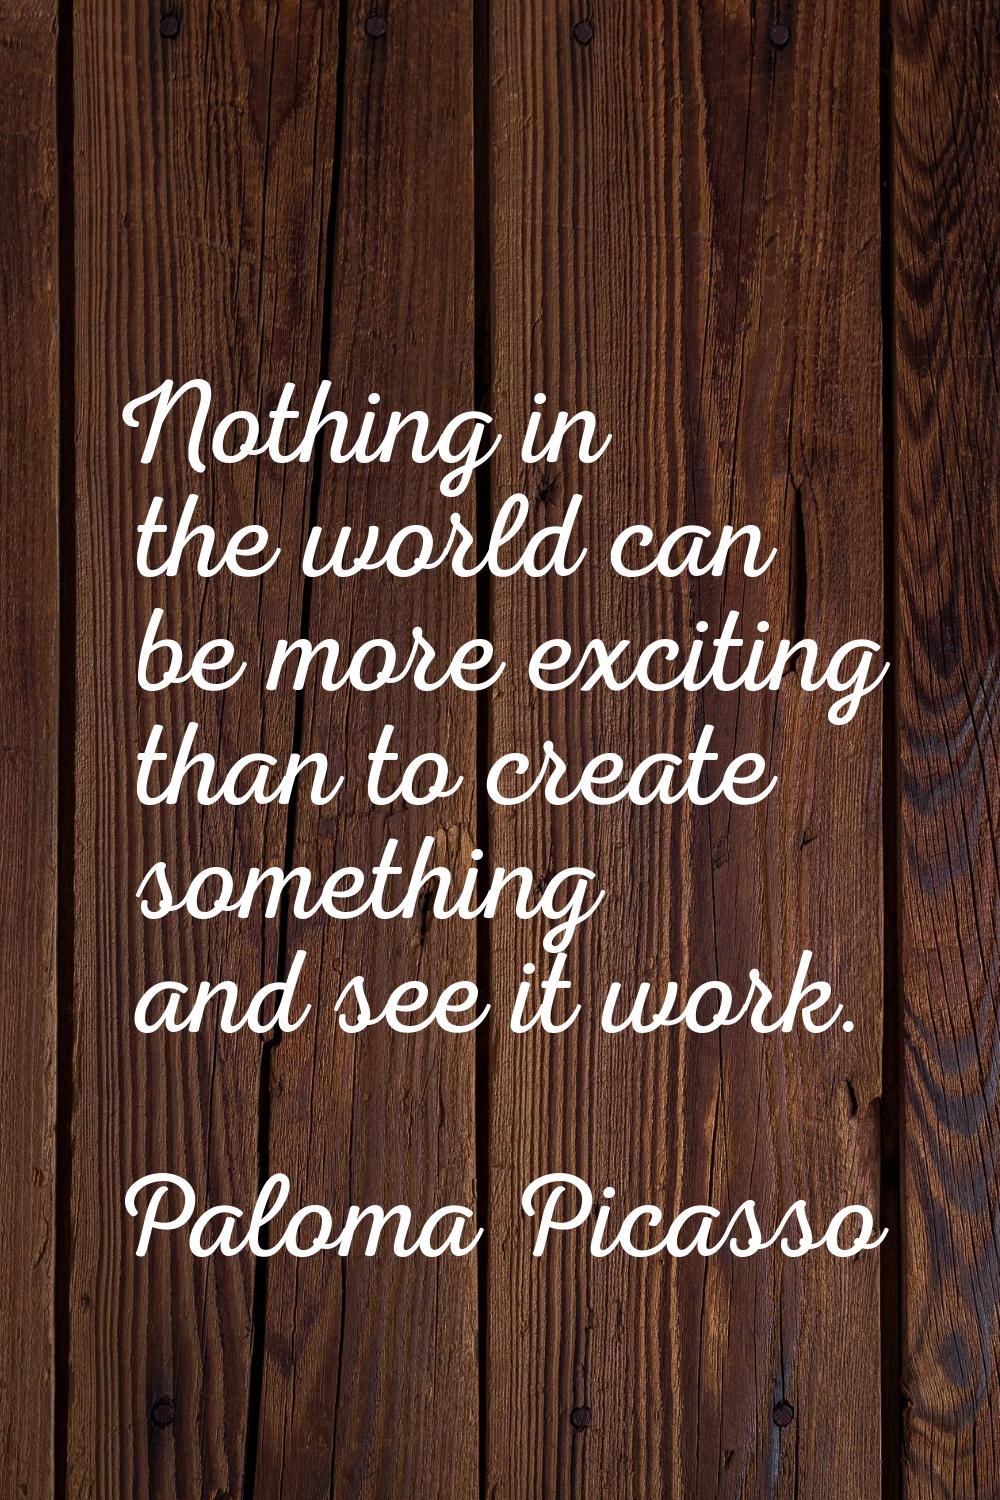 Nothing in the world can be more exciting than to create something and see it work.